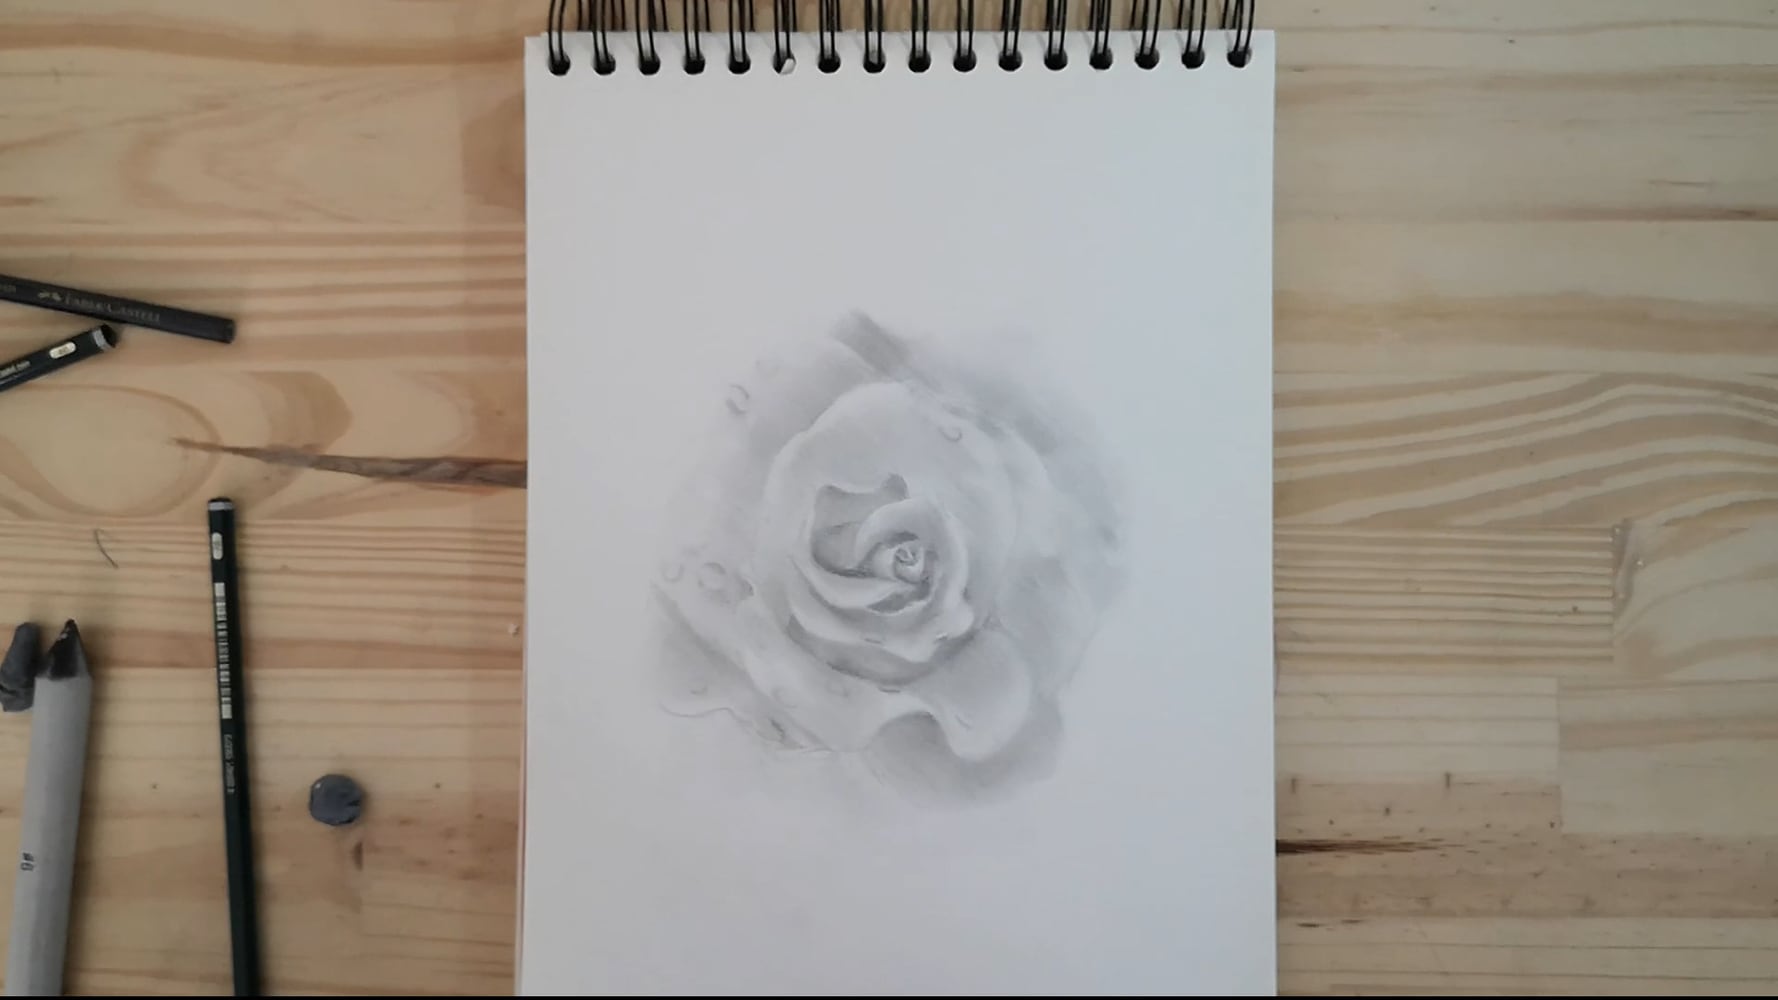 How to draw a rose easy step by step tutorial